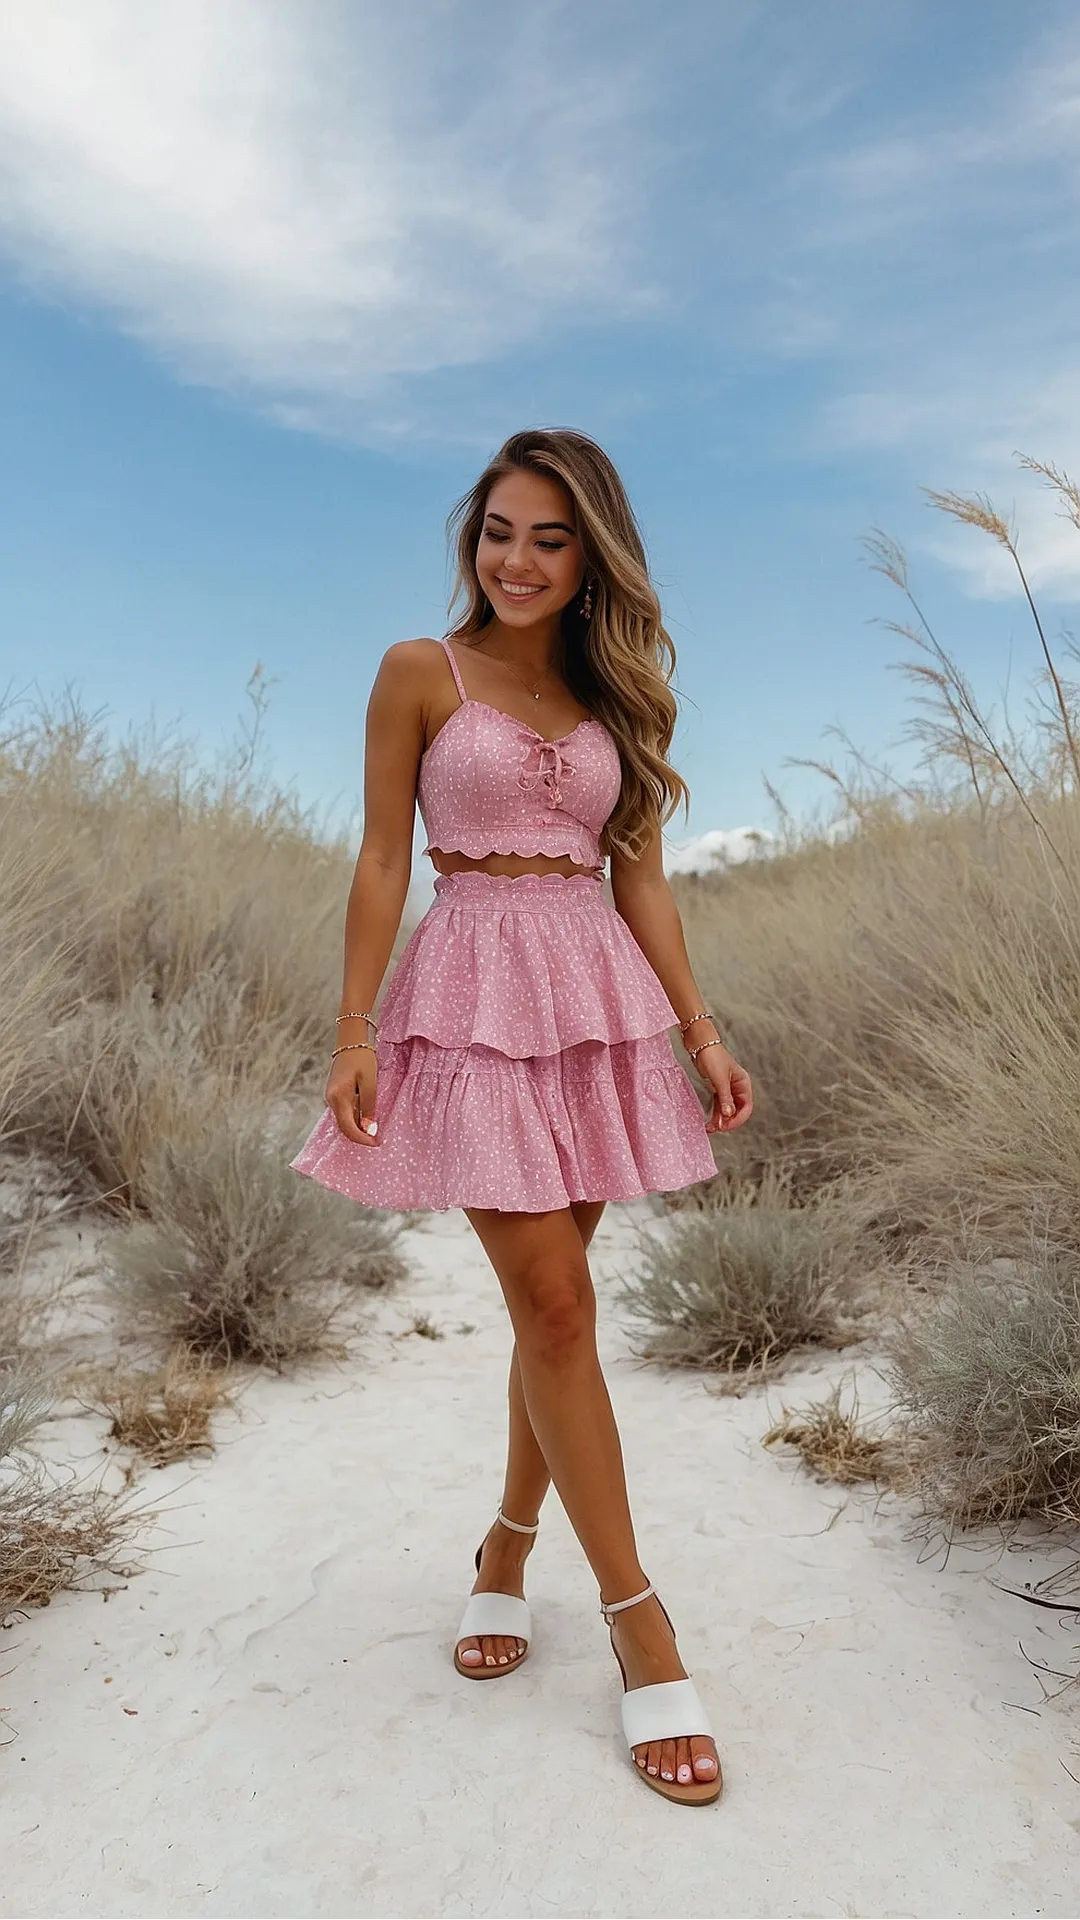 Girly Glamour: Fashionable Outfit Finds